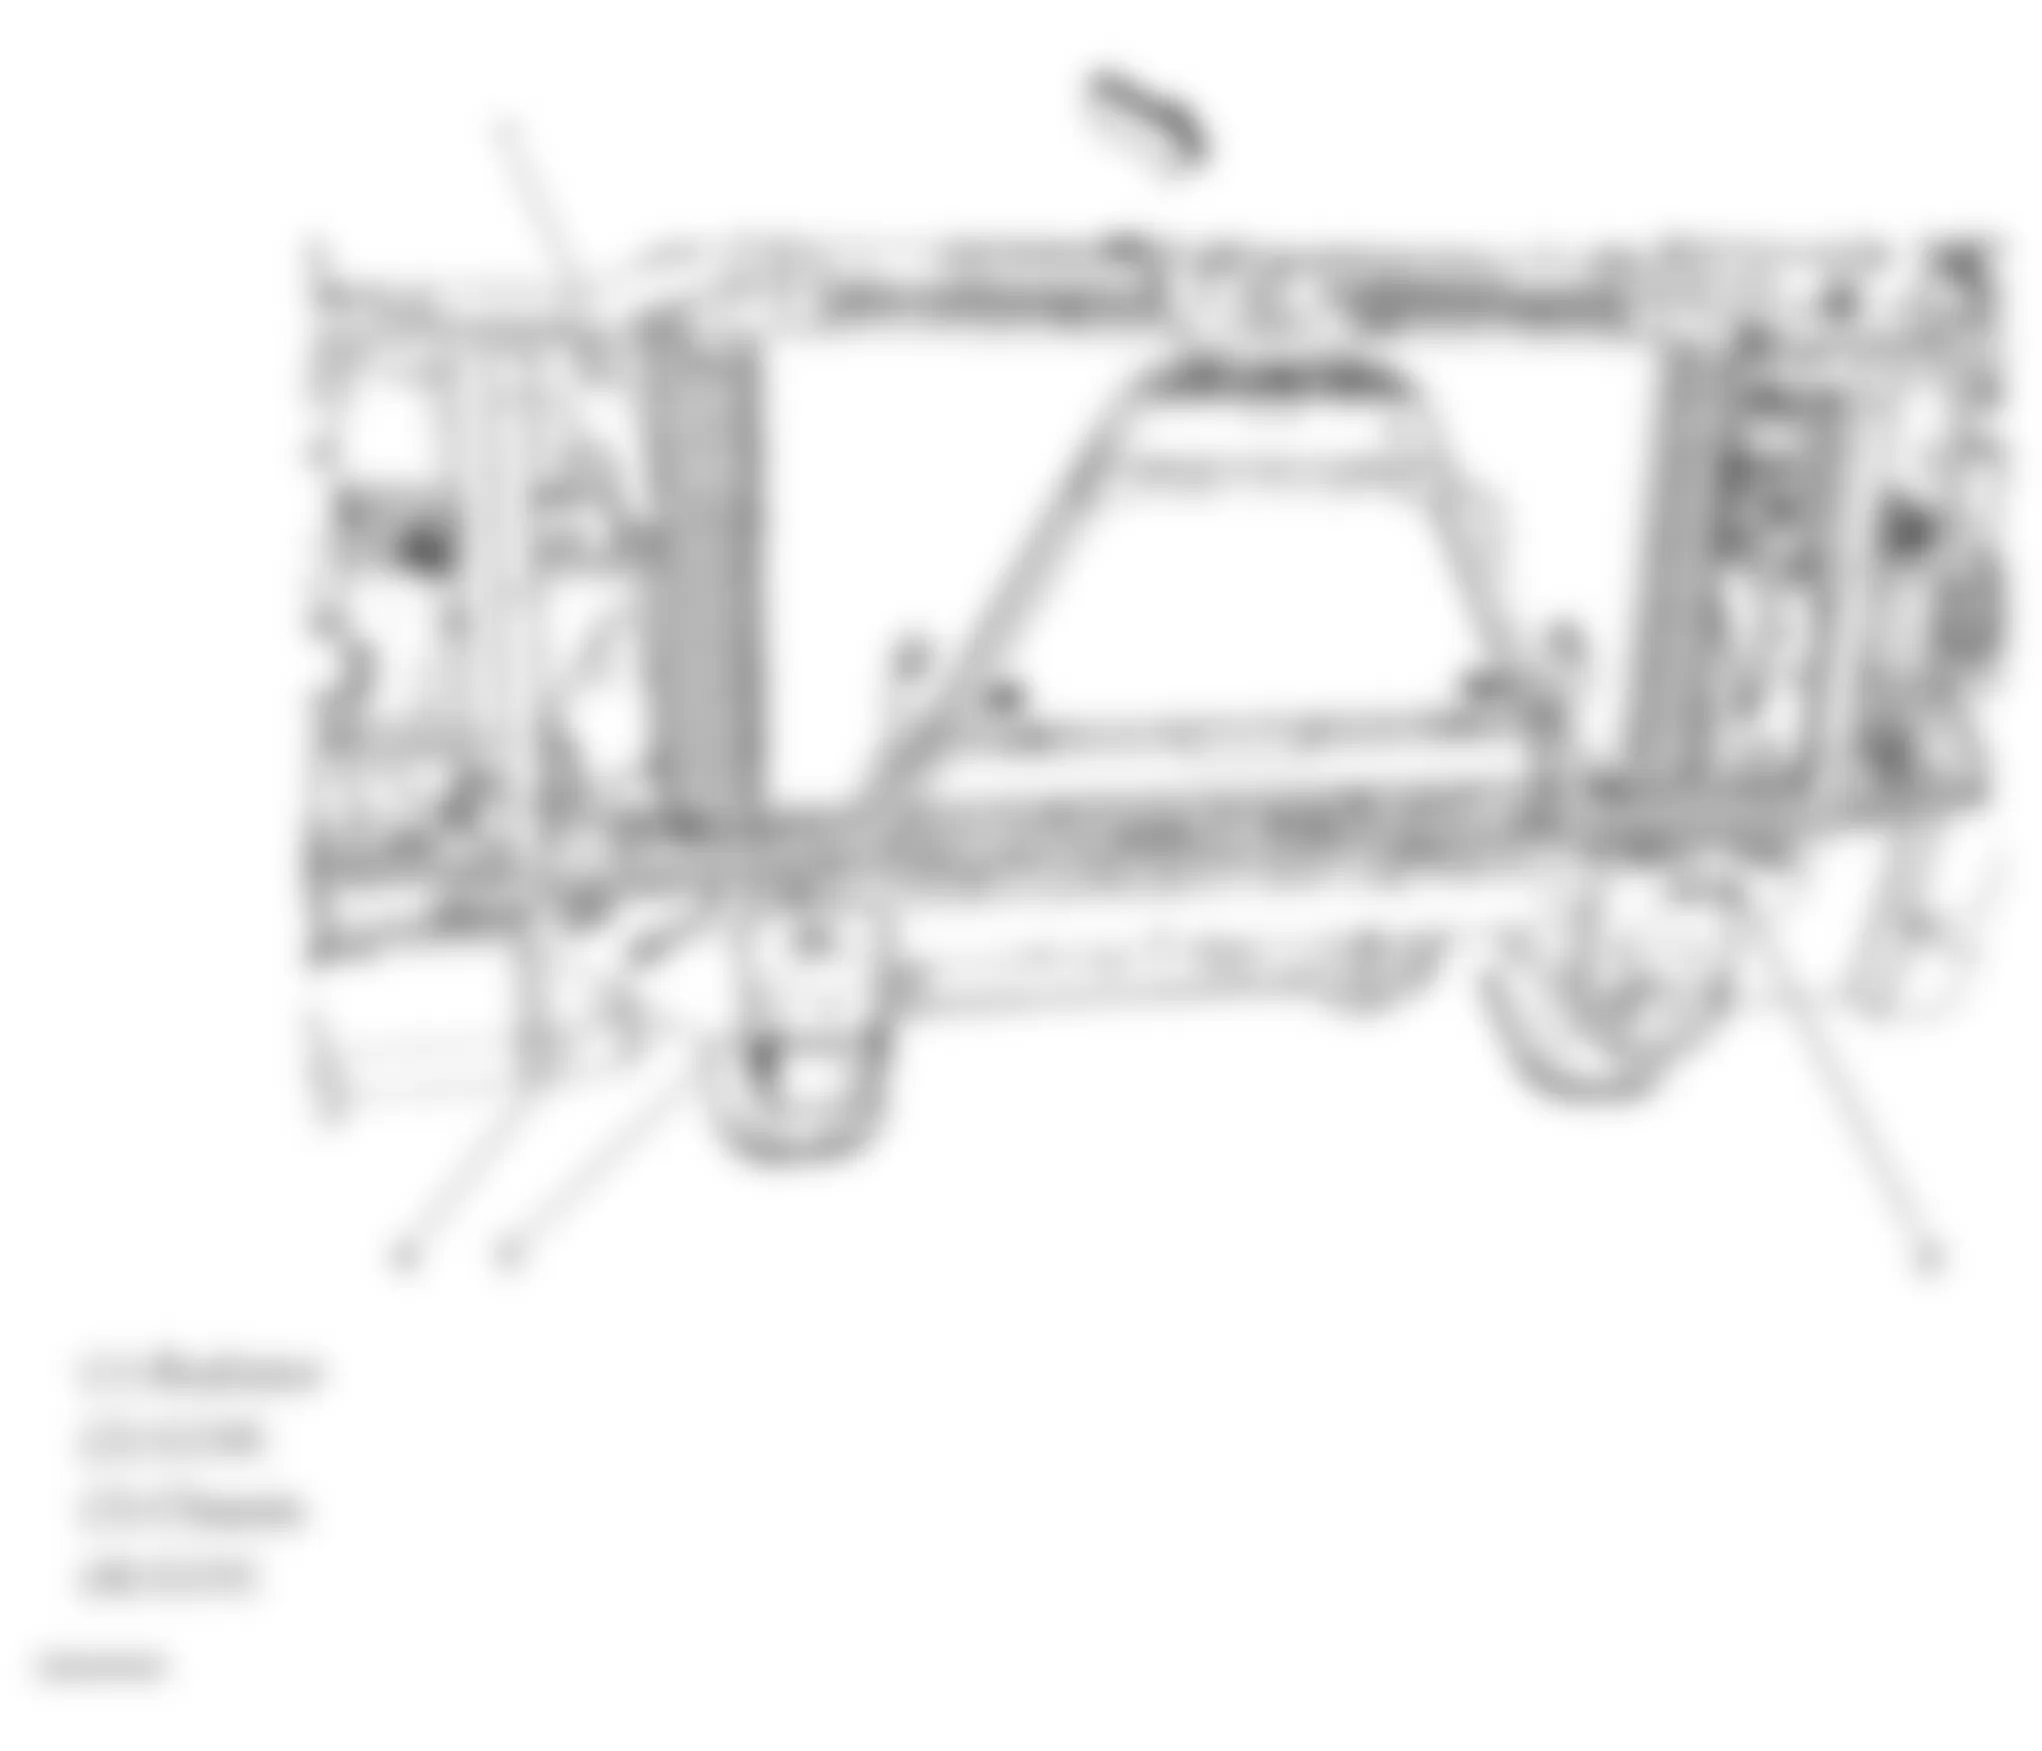 Chevrolet Silverado 3500 HD 2009 - Component Locations -  Front Of Vehicle